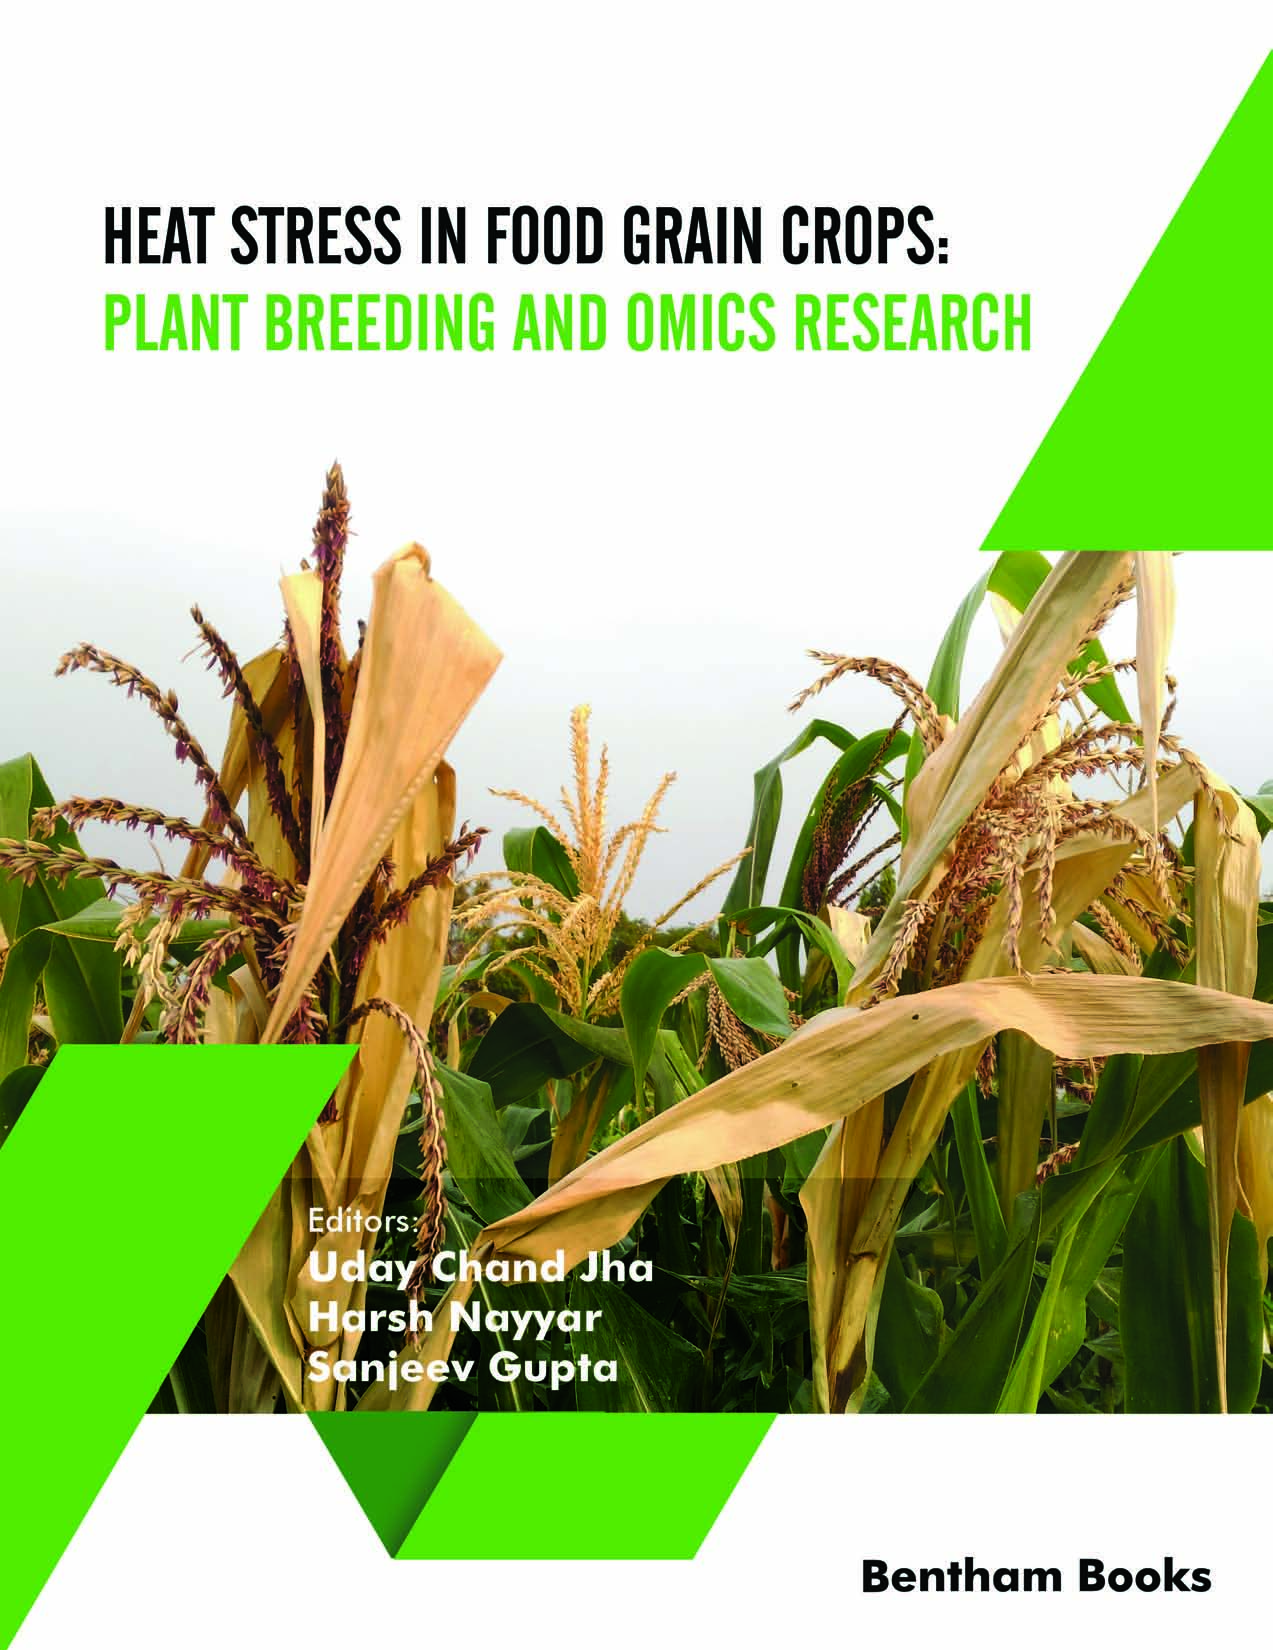 Heat Stress In Food Grain Crops: Plant Breeding and Omics Research